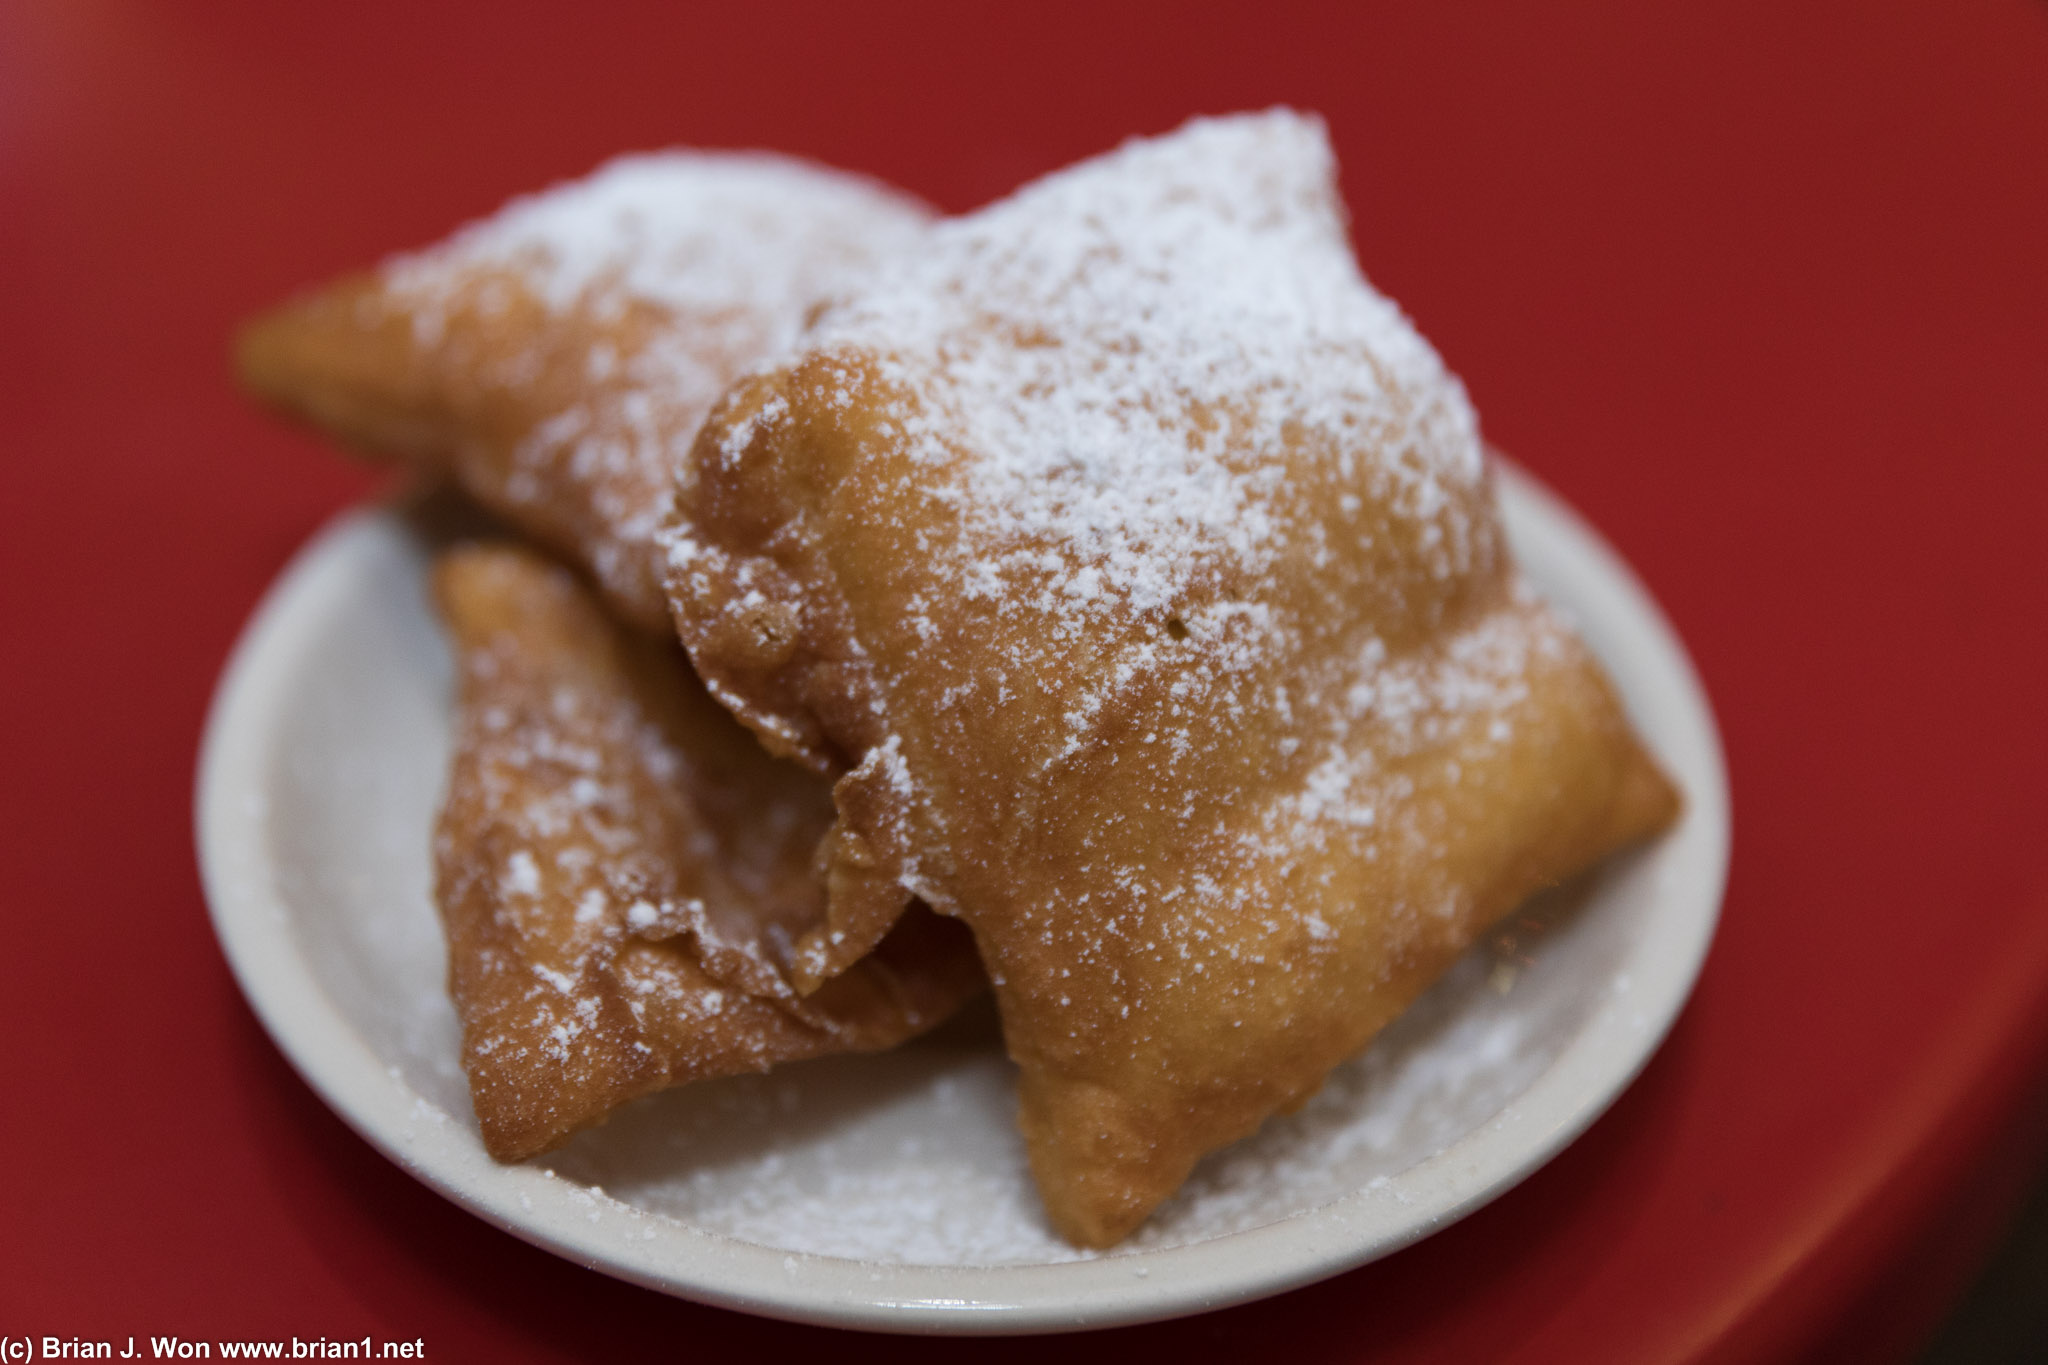 Beignets! Top two were excellent, 3rd was just a tad over-fried.